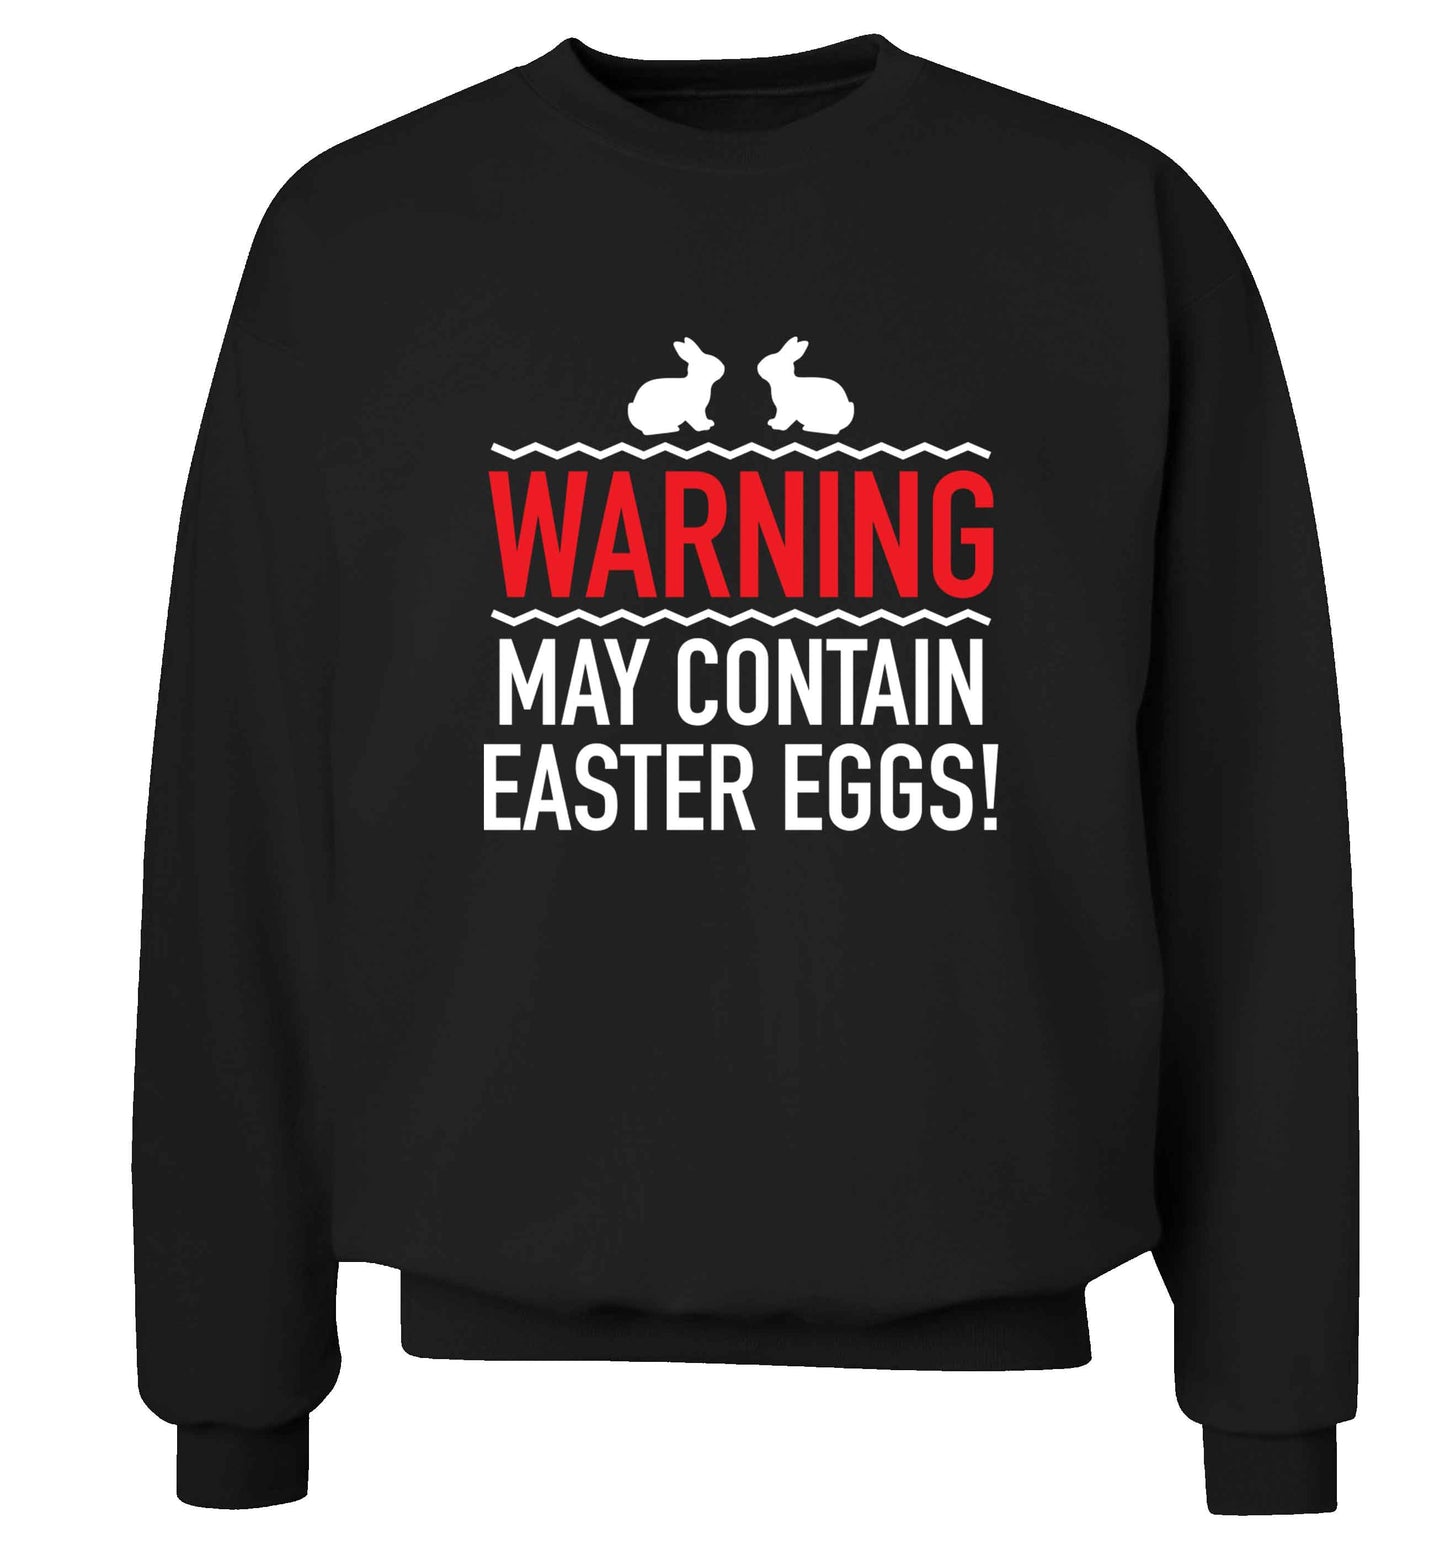 Warning may contain Easter eggs adult's unisex black sweater 2XL